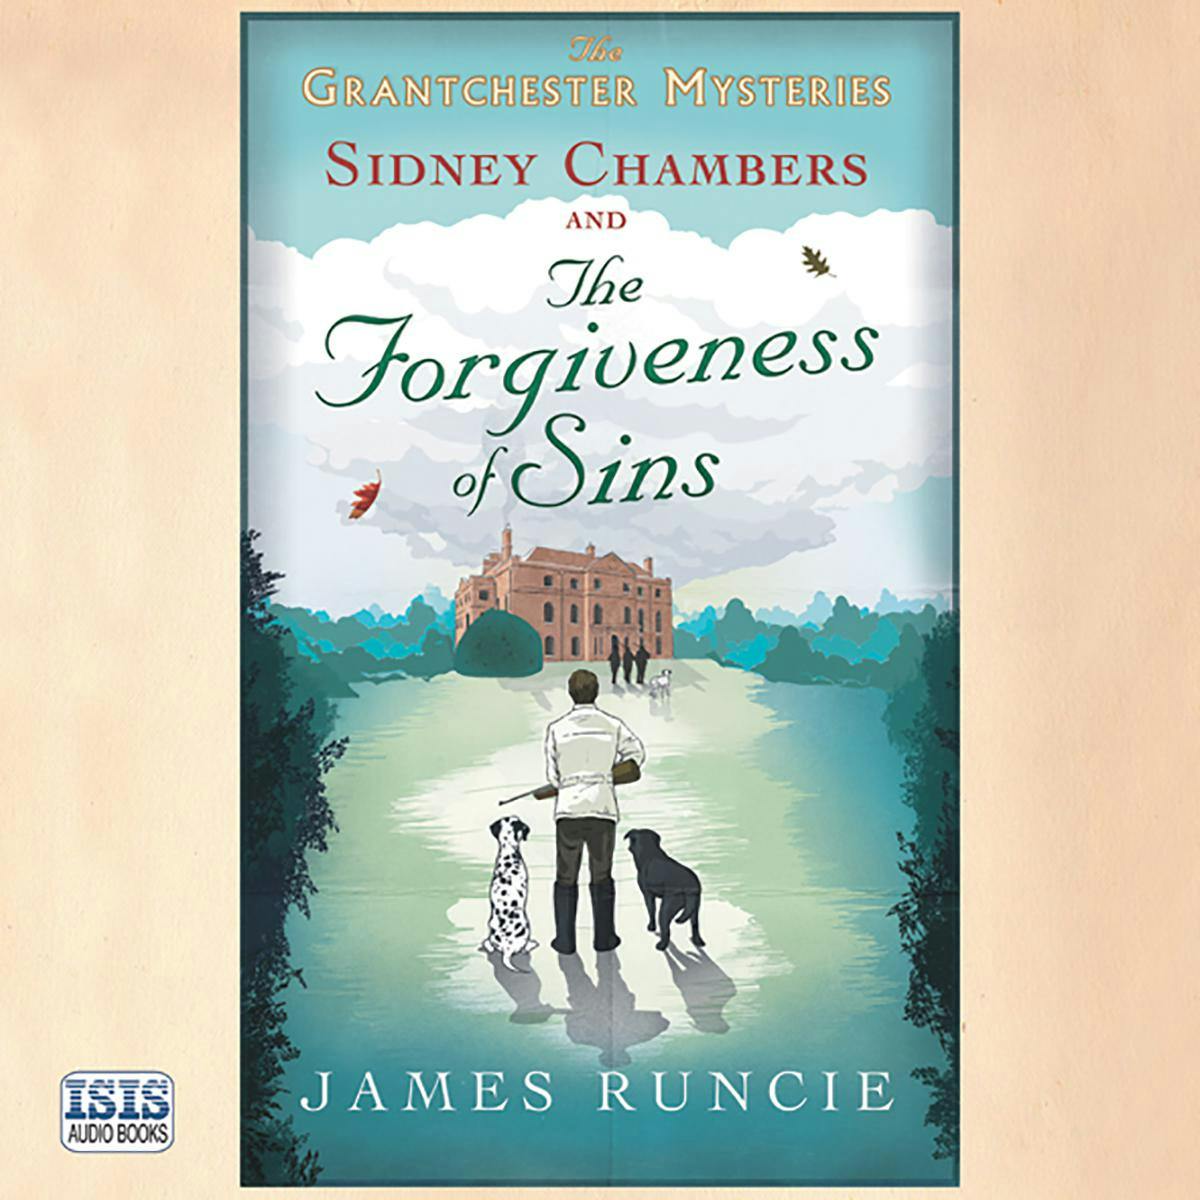 Sidney Chambers and the Forgiveness of Sins - James Runcie